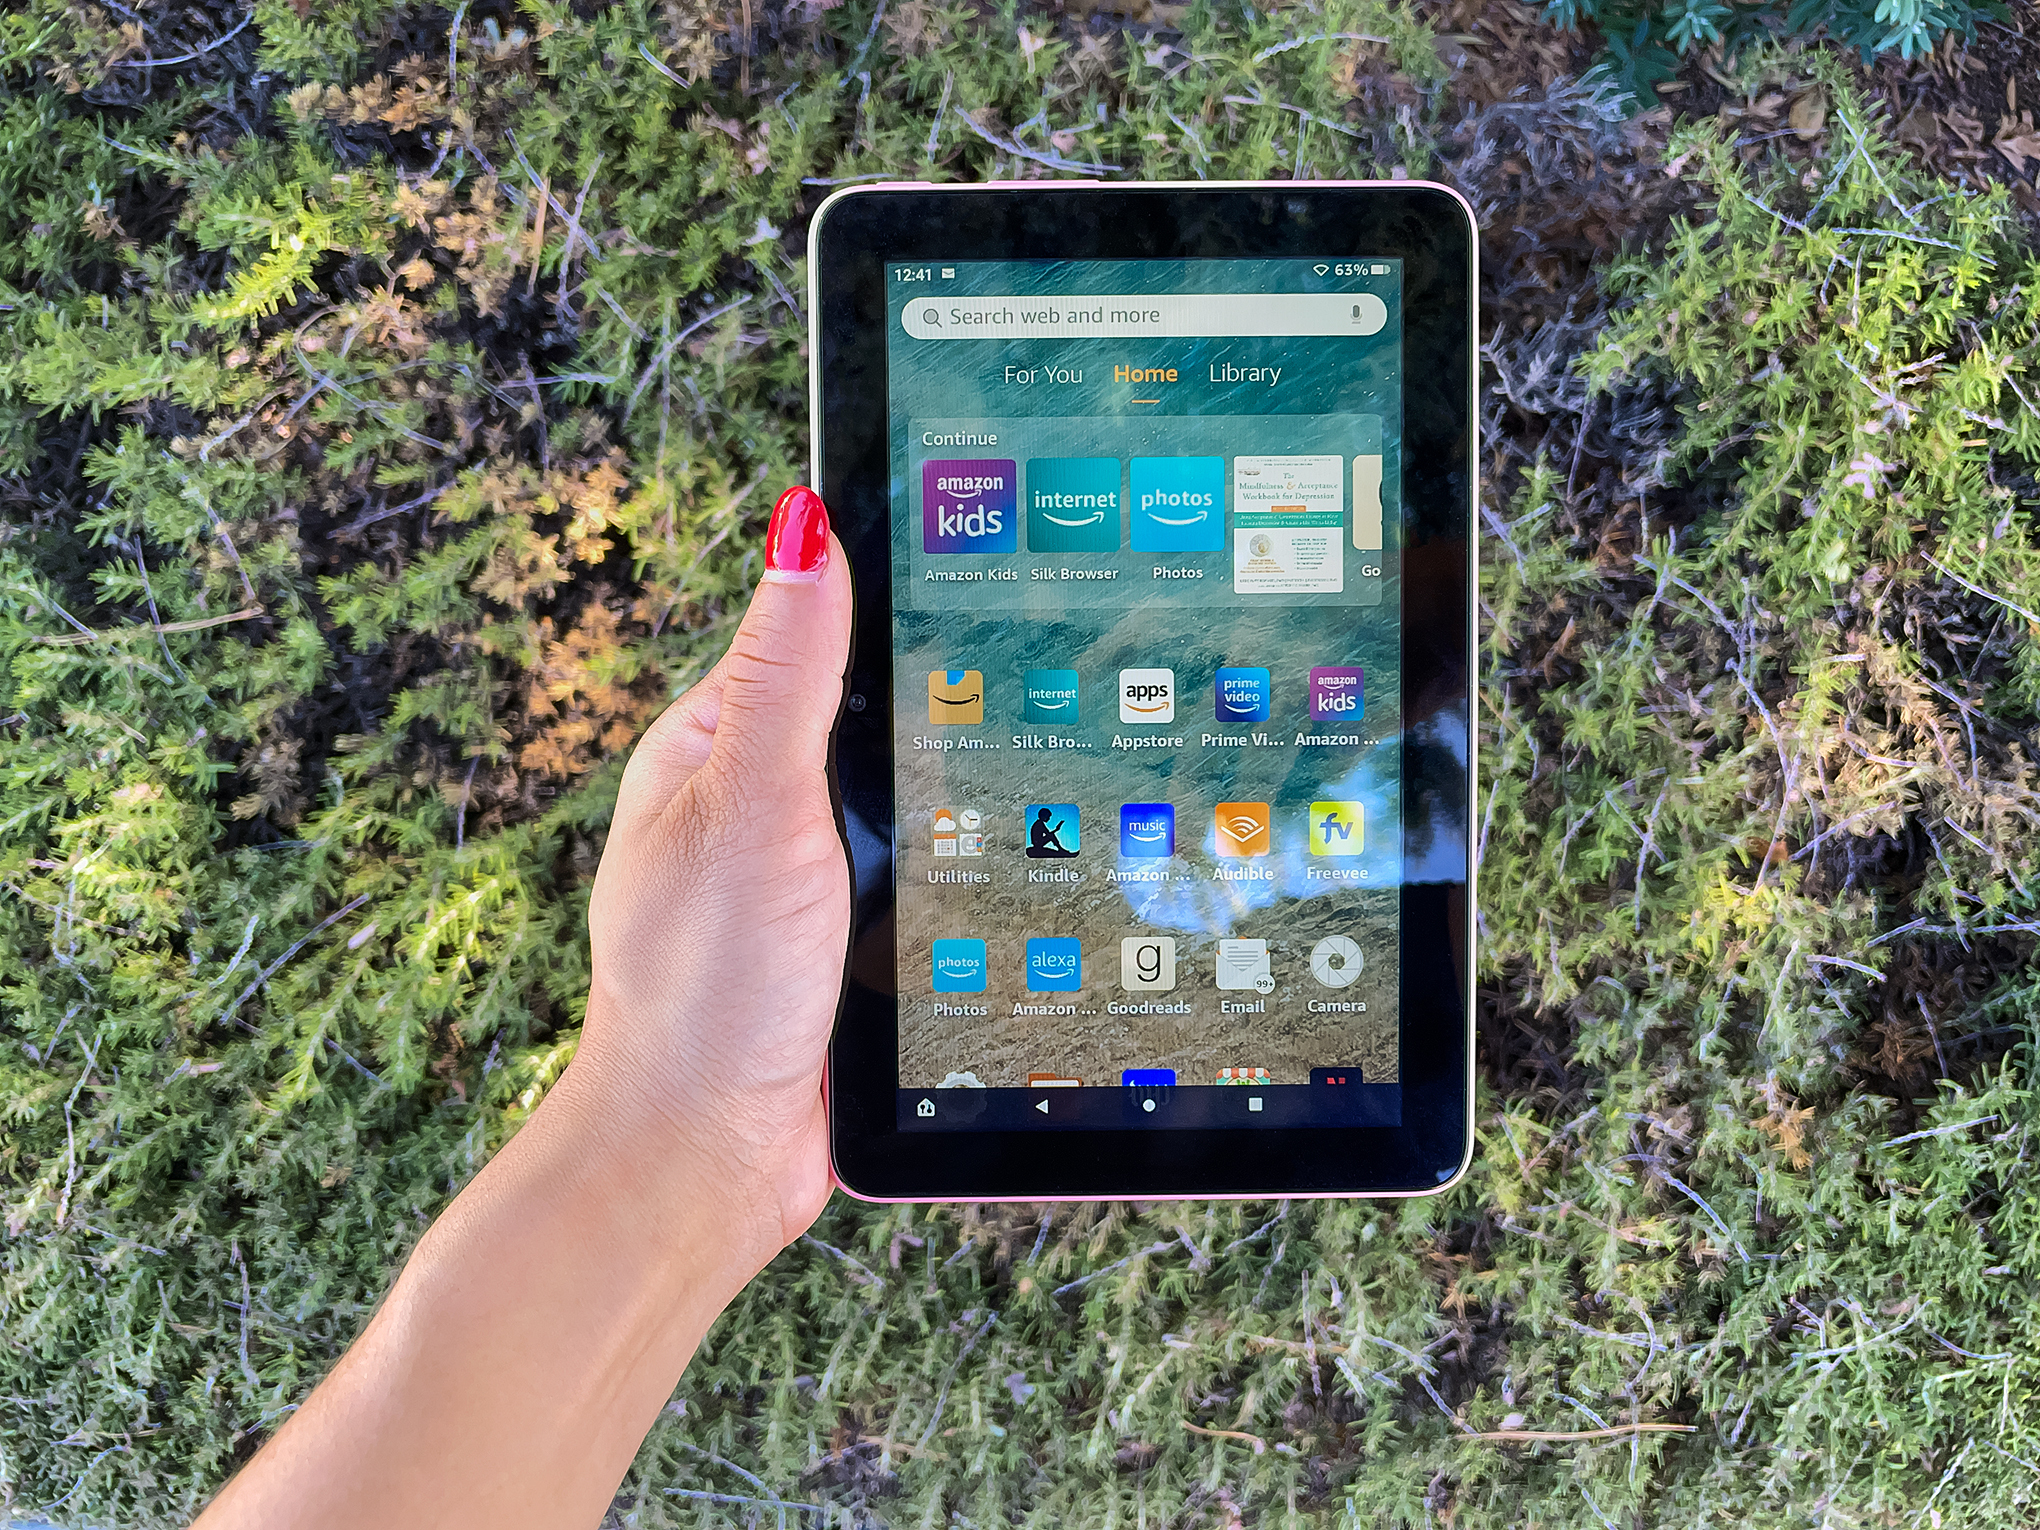 Amazon Fire 7 review: a budget tablet for the basics - The Verge